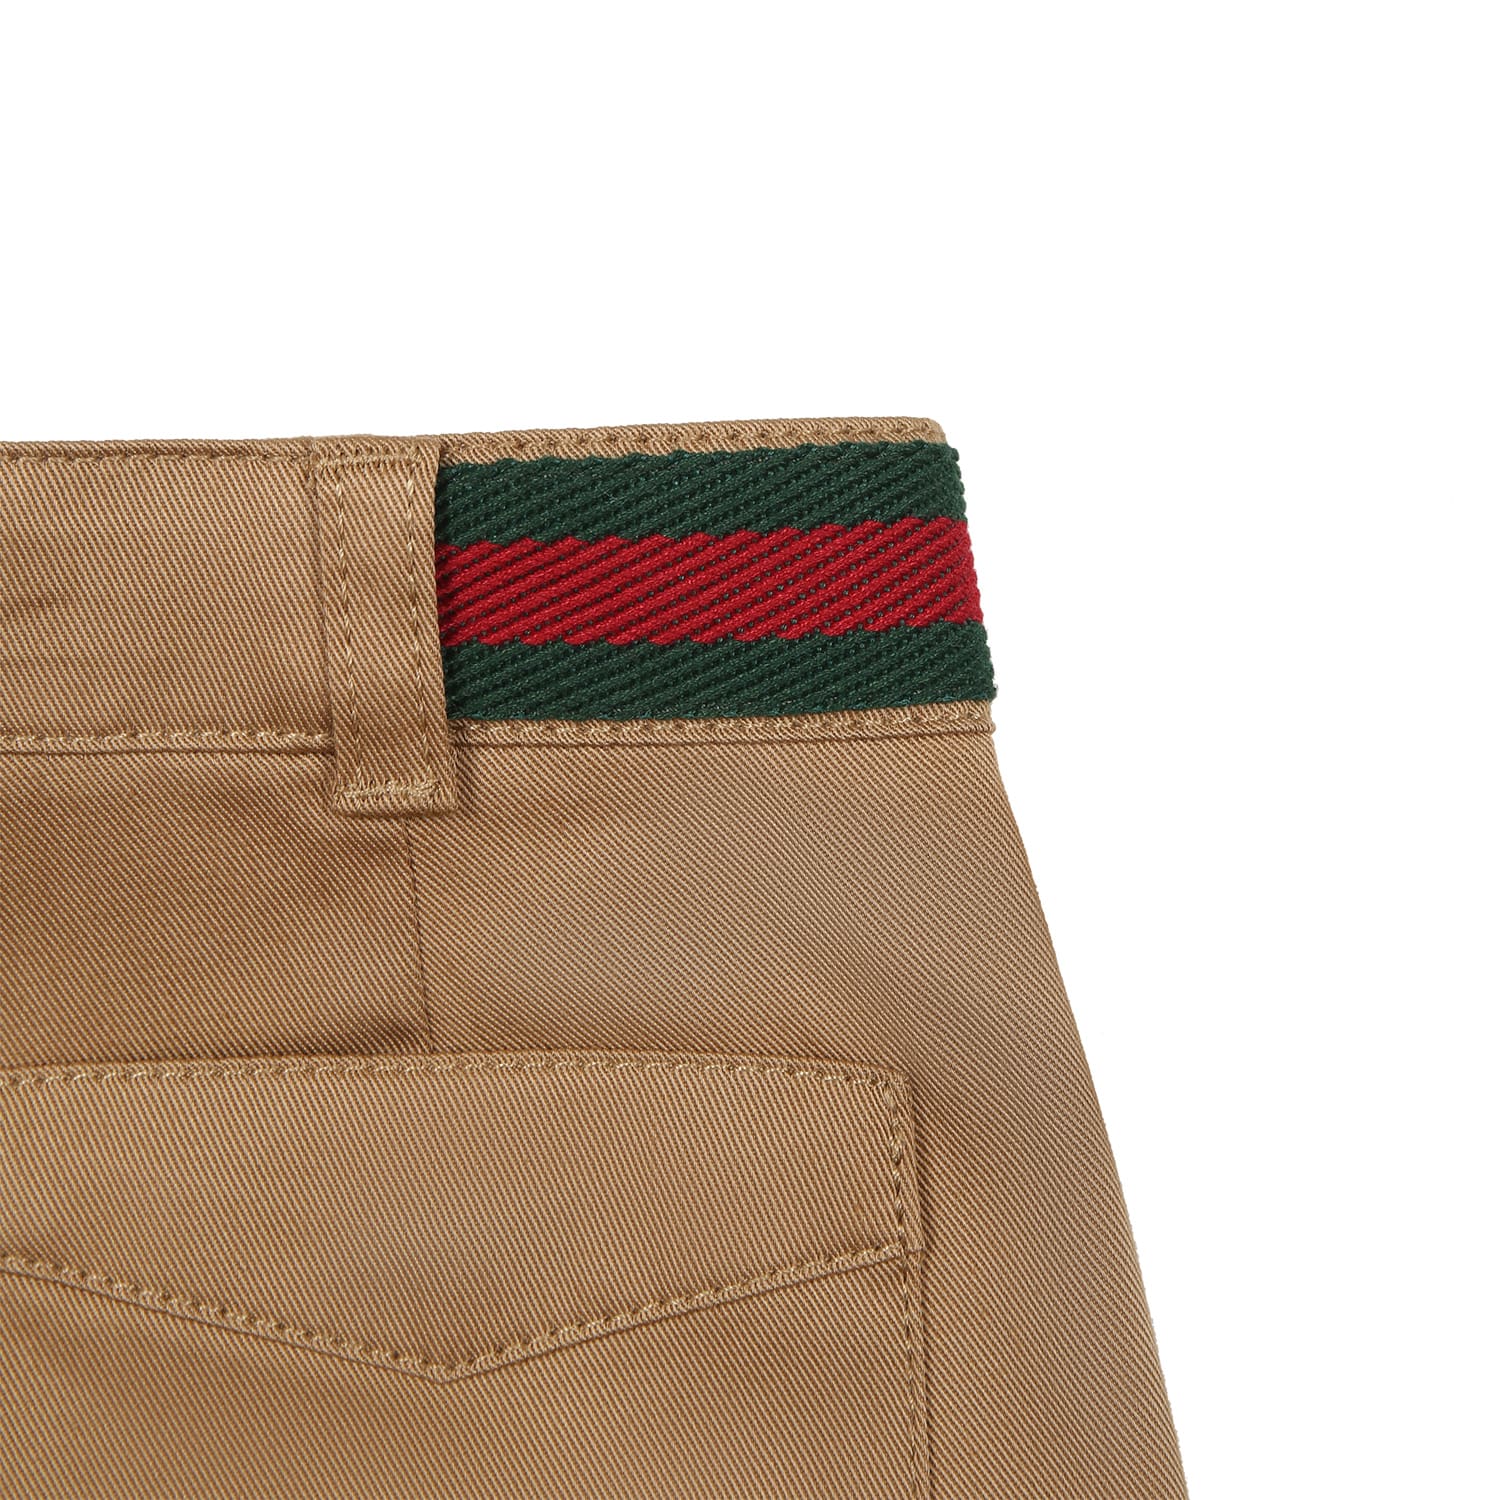 Shop Gucci Beige Shorts For Baby Boy With Web Detail